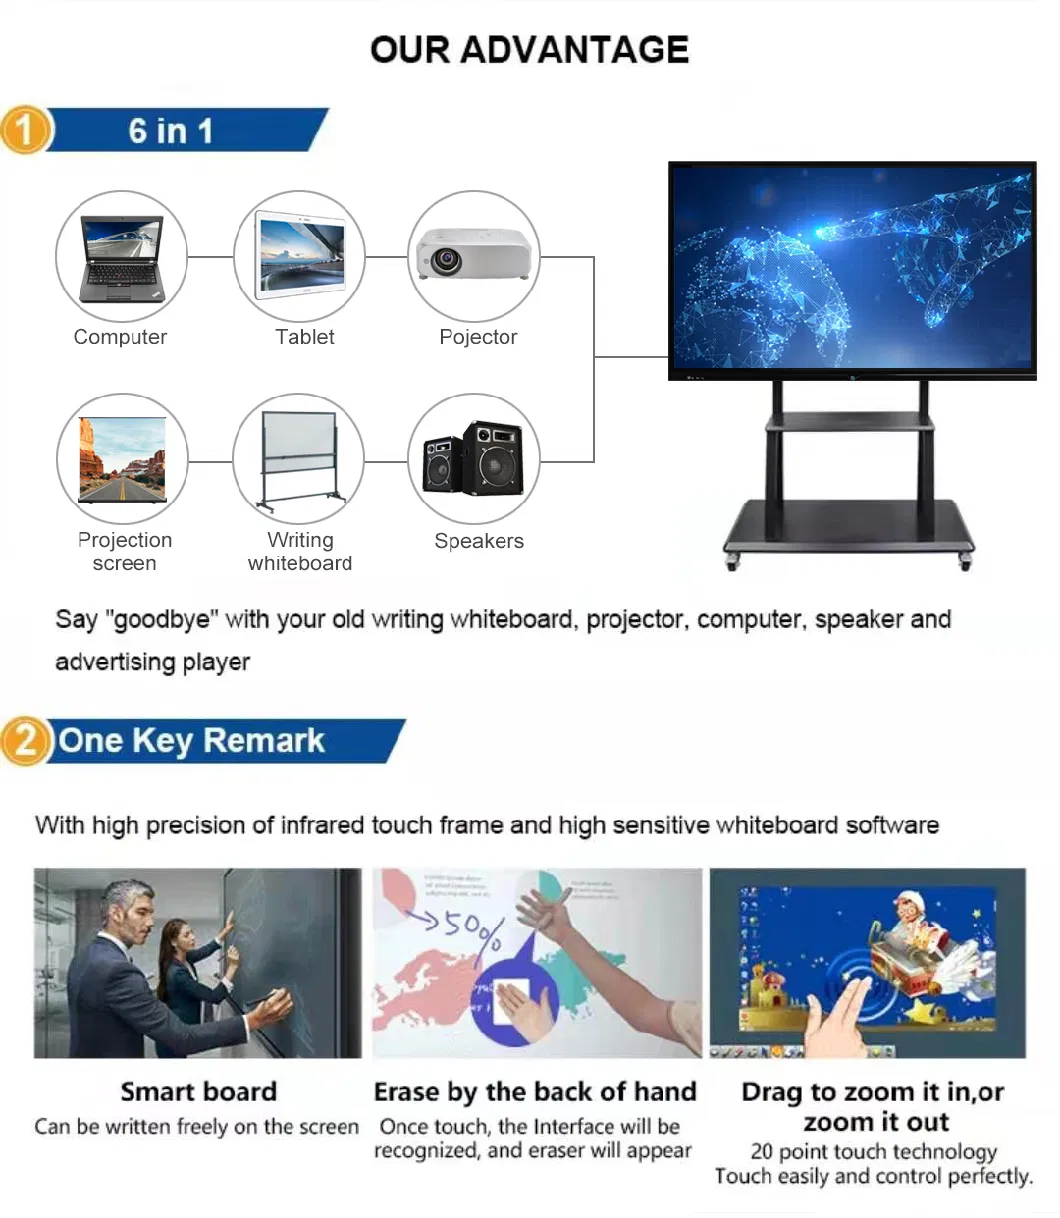 All in One Sales Infrared LED Touch Computer Touch Interactive Manufacturer Panel Smart Board Miboard Kiosk Conference Education Whiteboard Display LCD Screen